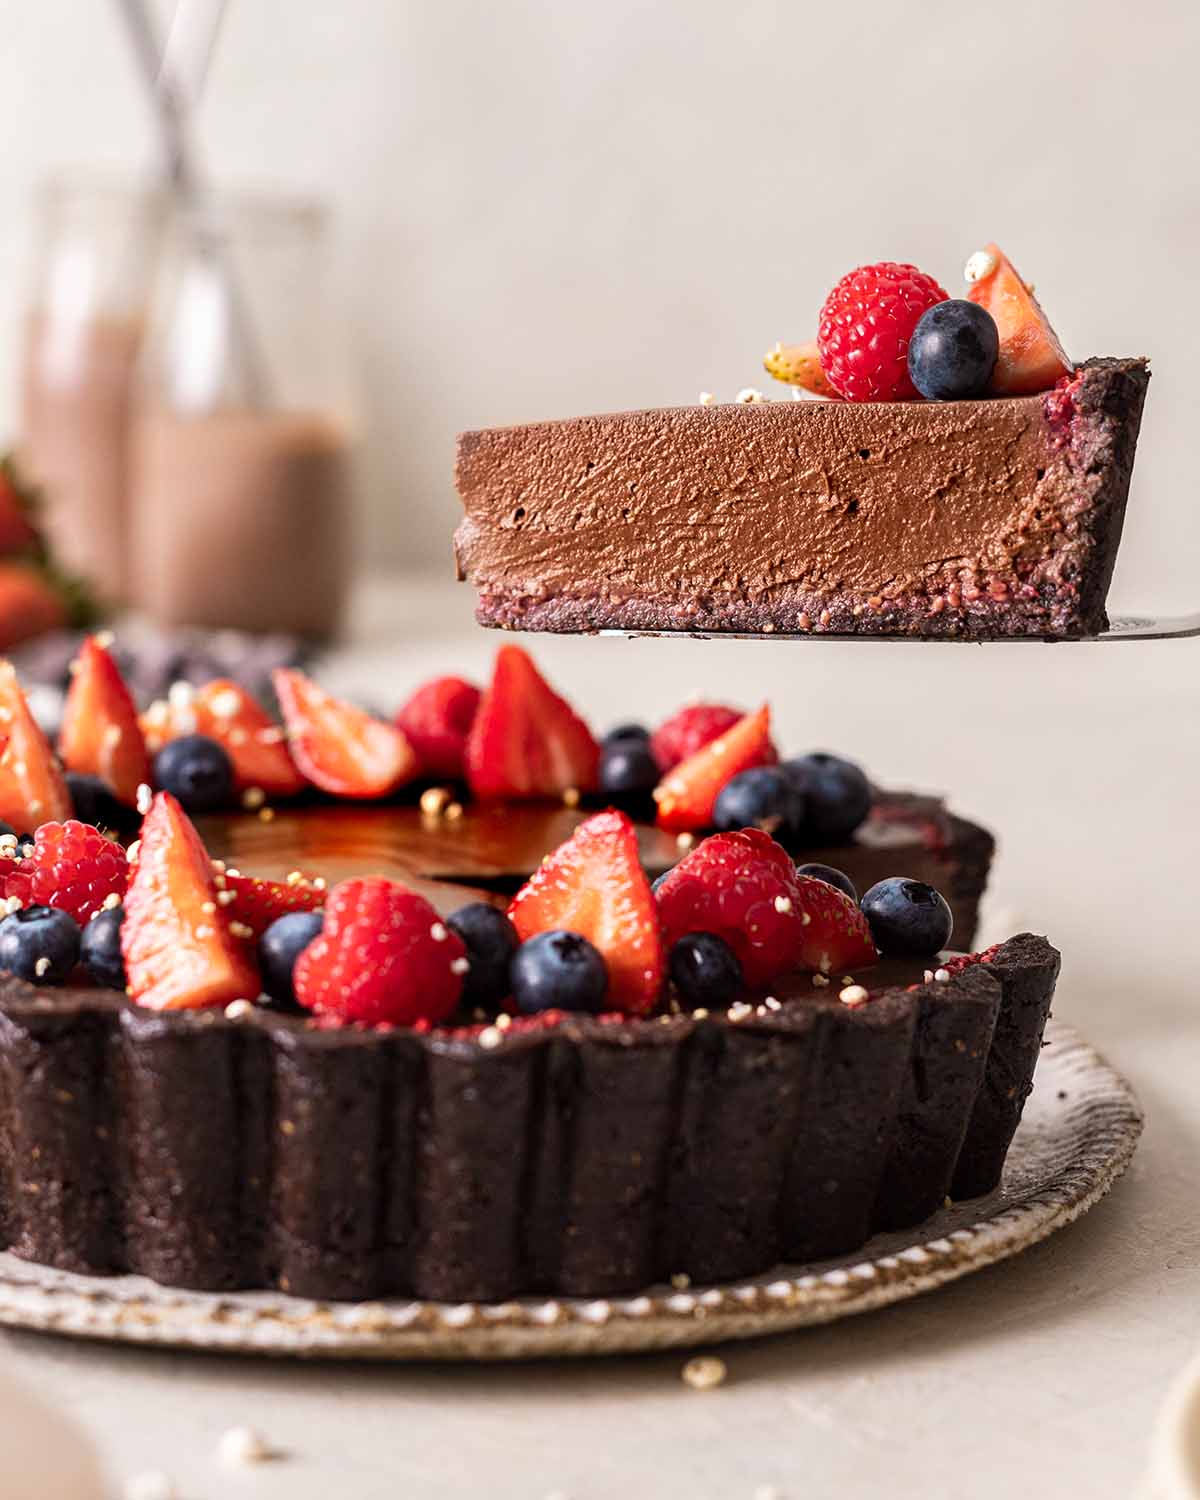 Slice of vegan chocolate tart lifted up  revealing the different layers and textures.